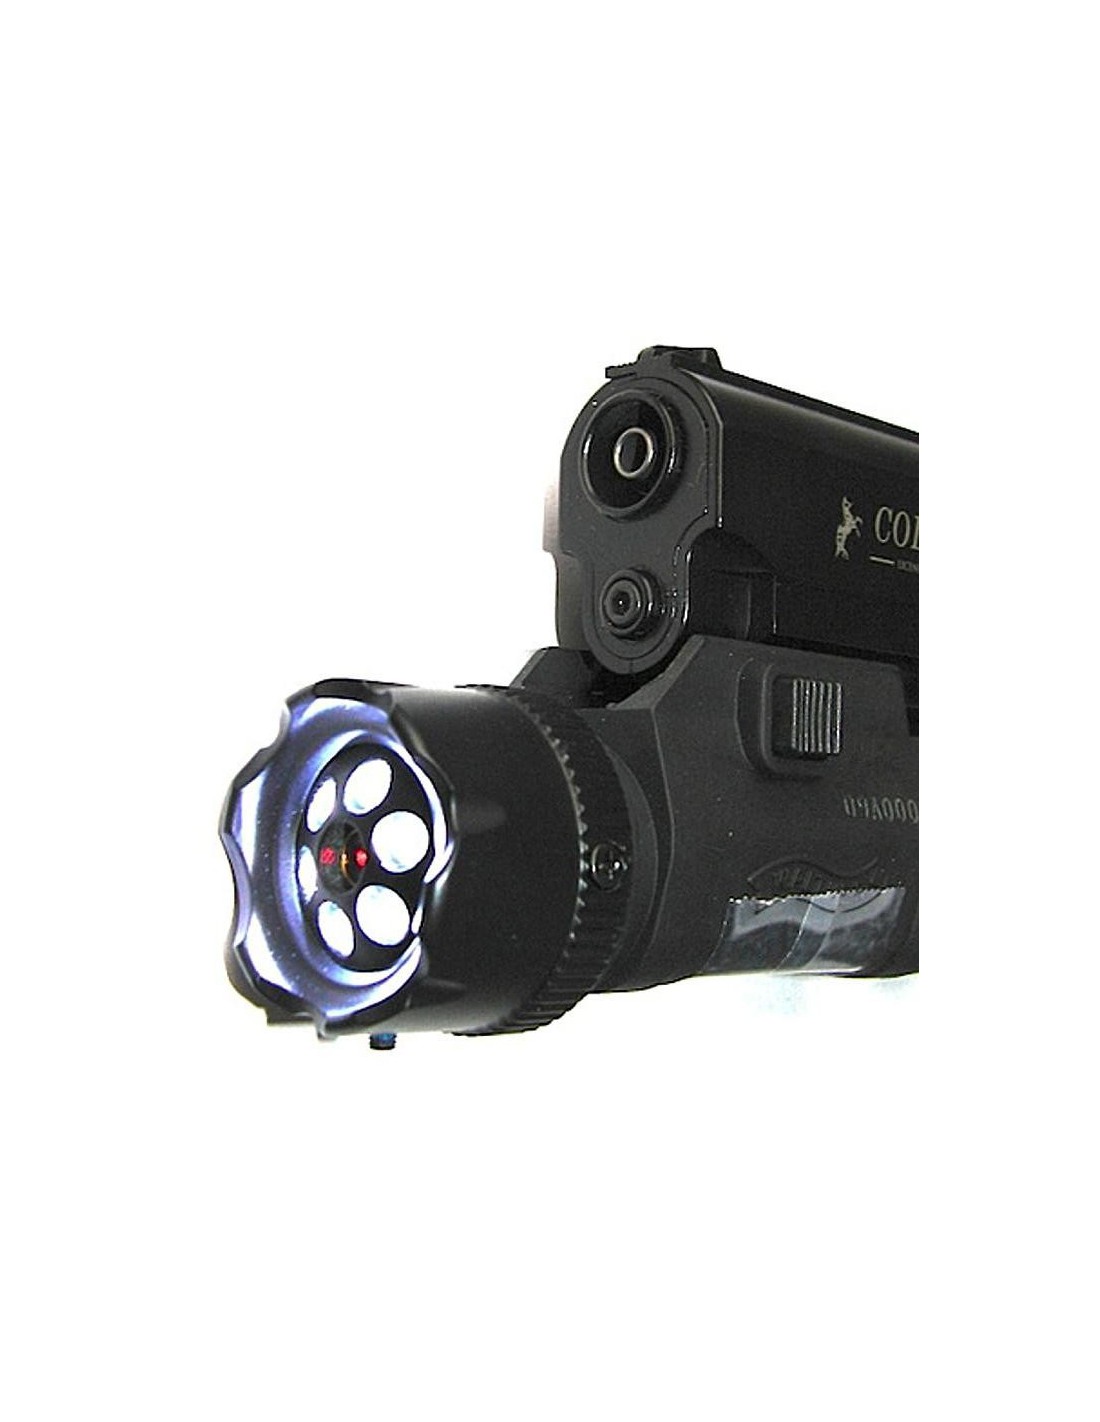 Laser avec Lampe 6 leds class 2 walther